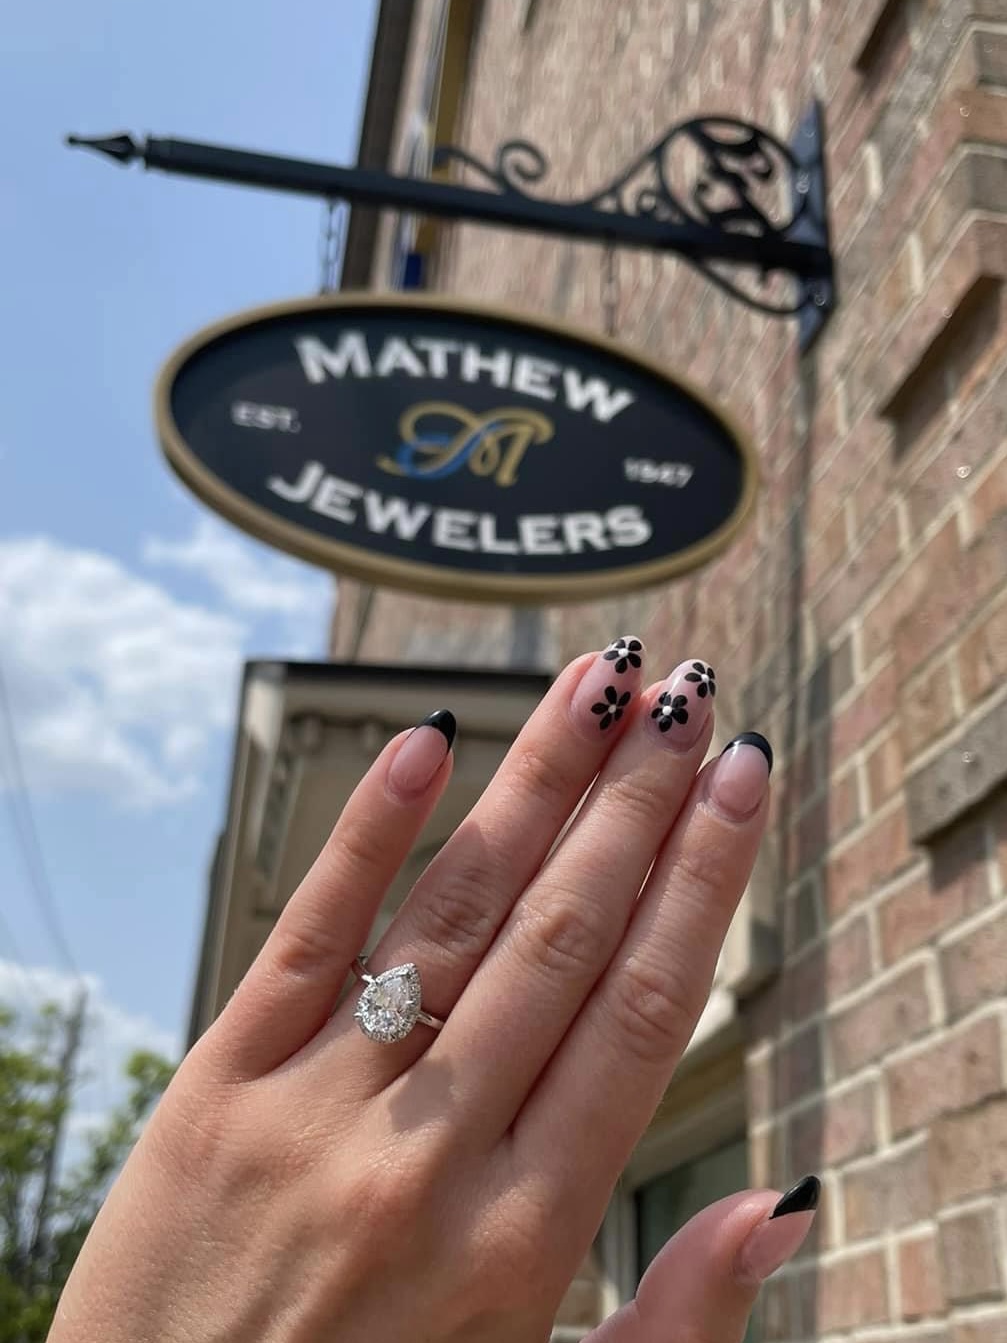 A photo of a hand with painted nails and a sparkling ring on the ring finger, with the Mathew Jewelers outdoor sign in the background.